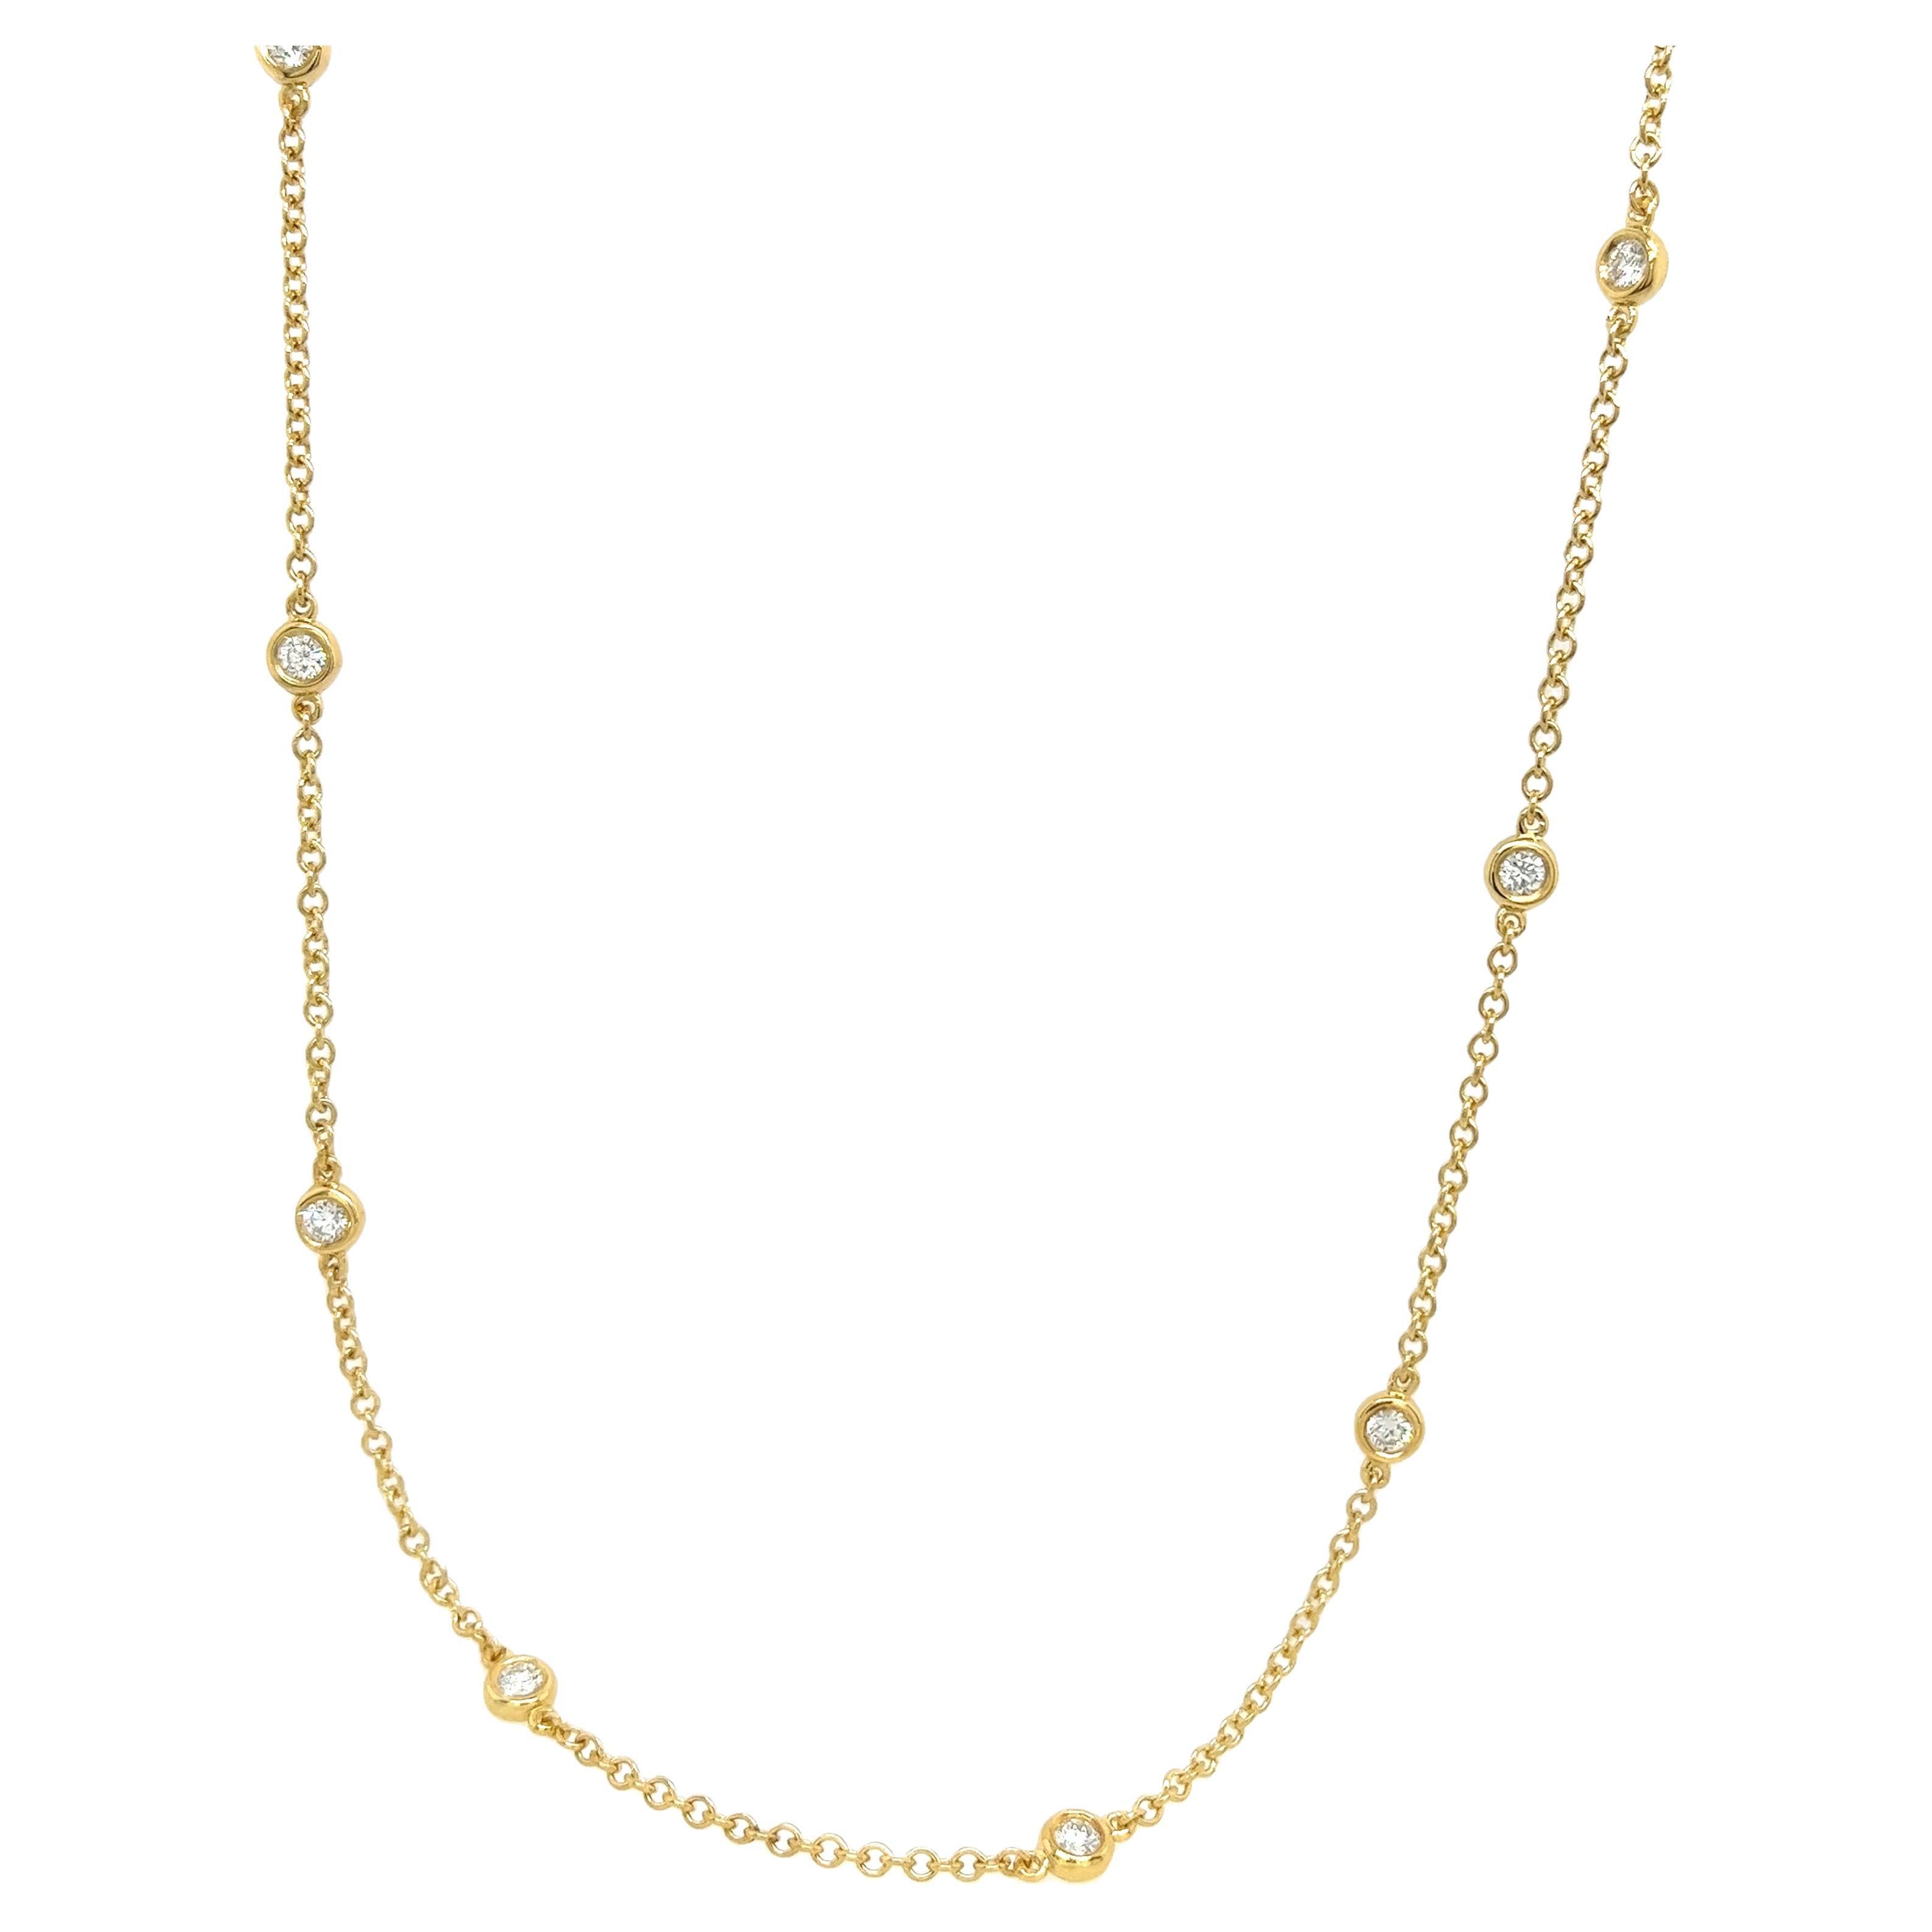 18ct Yellow Gold Necklace Set With 10 Round Brilliant Cut Diamonds